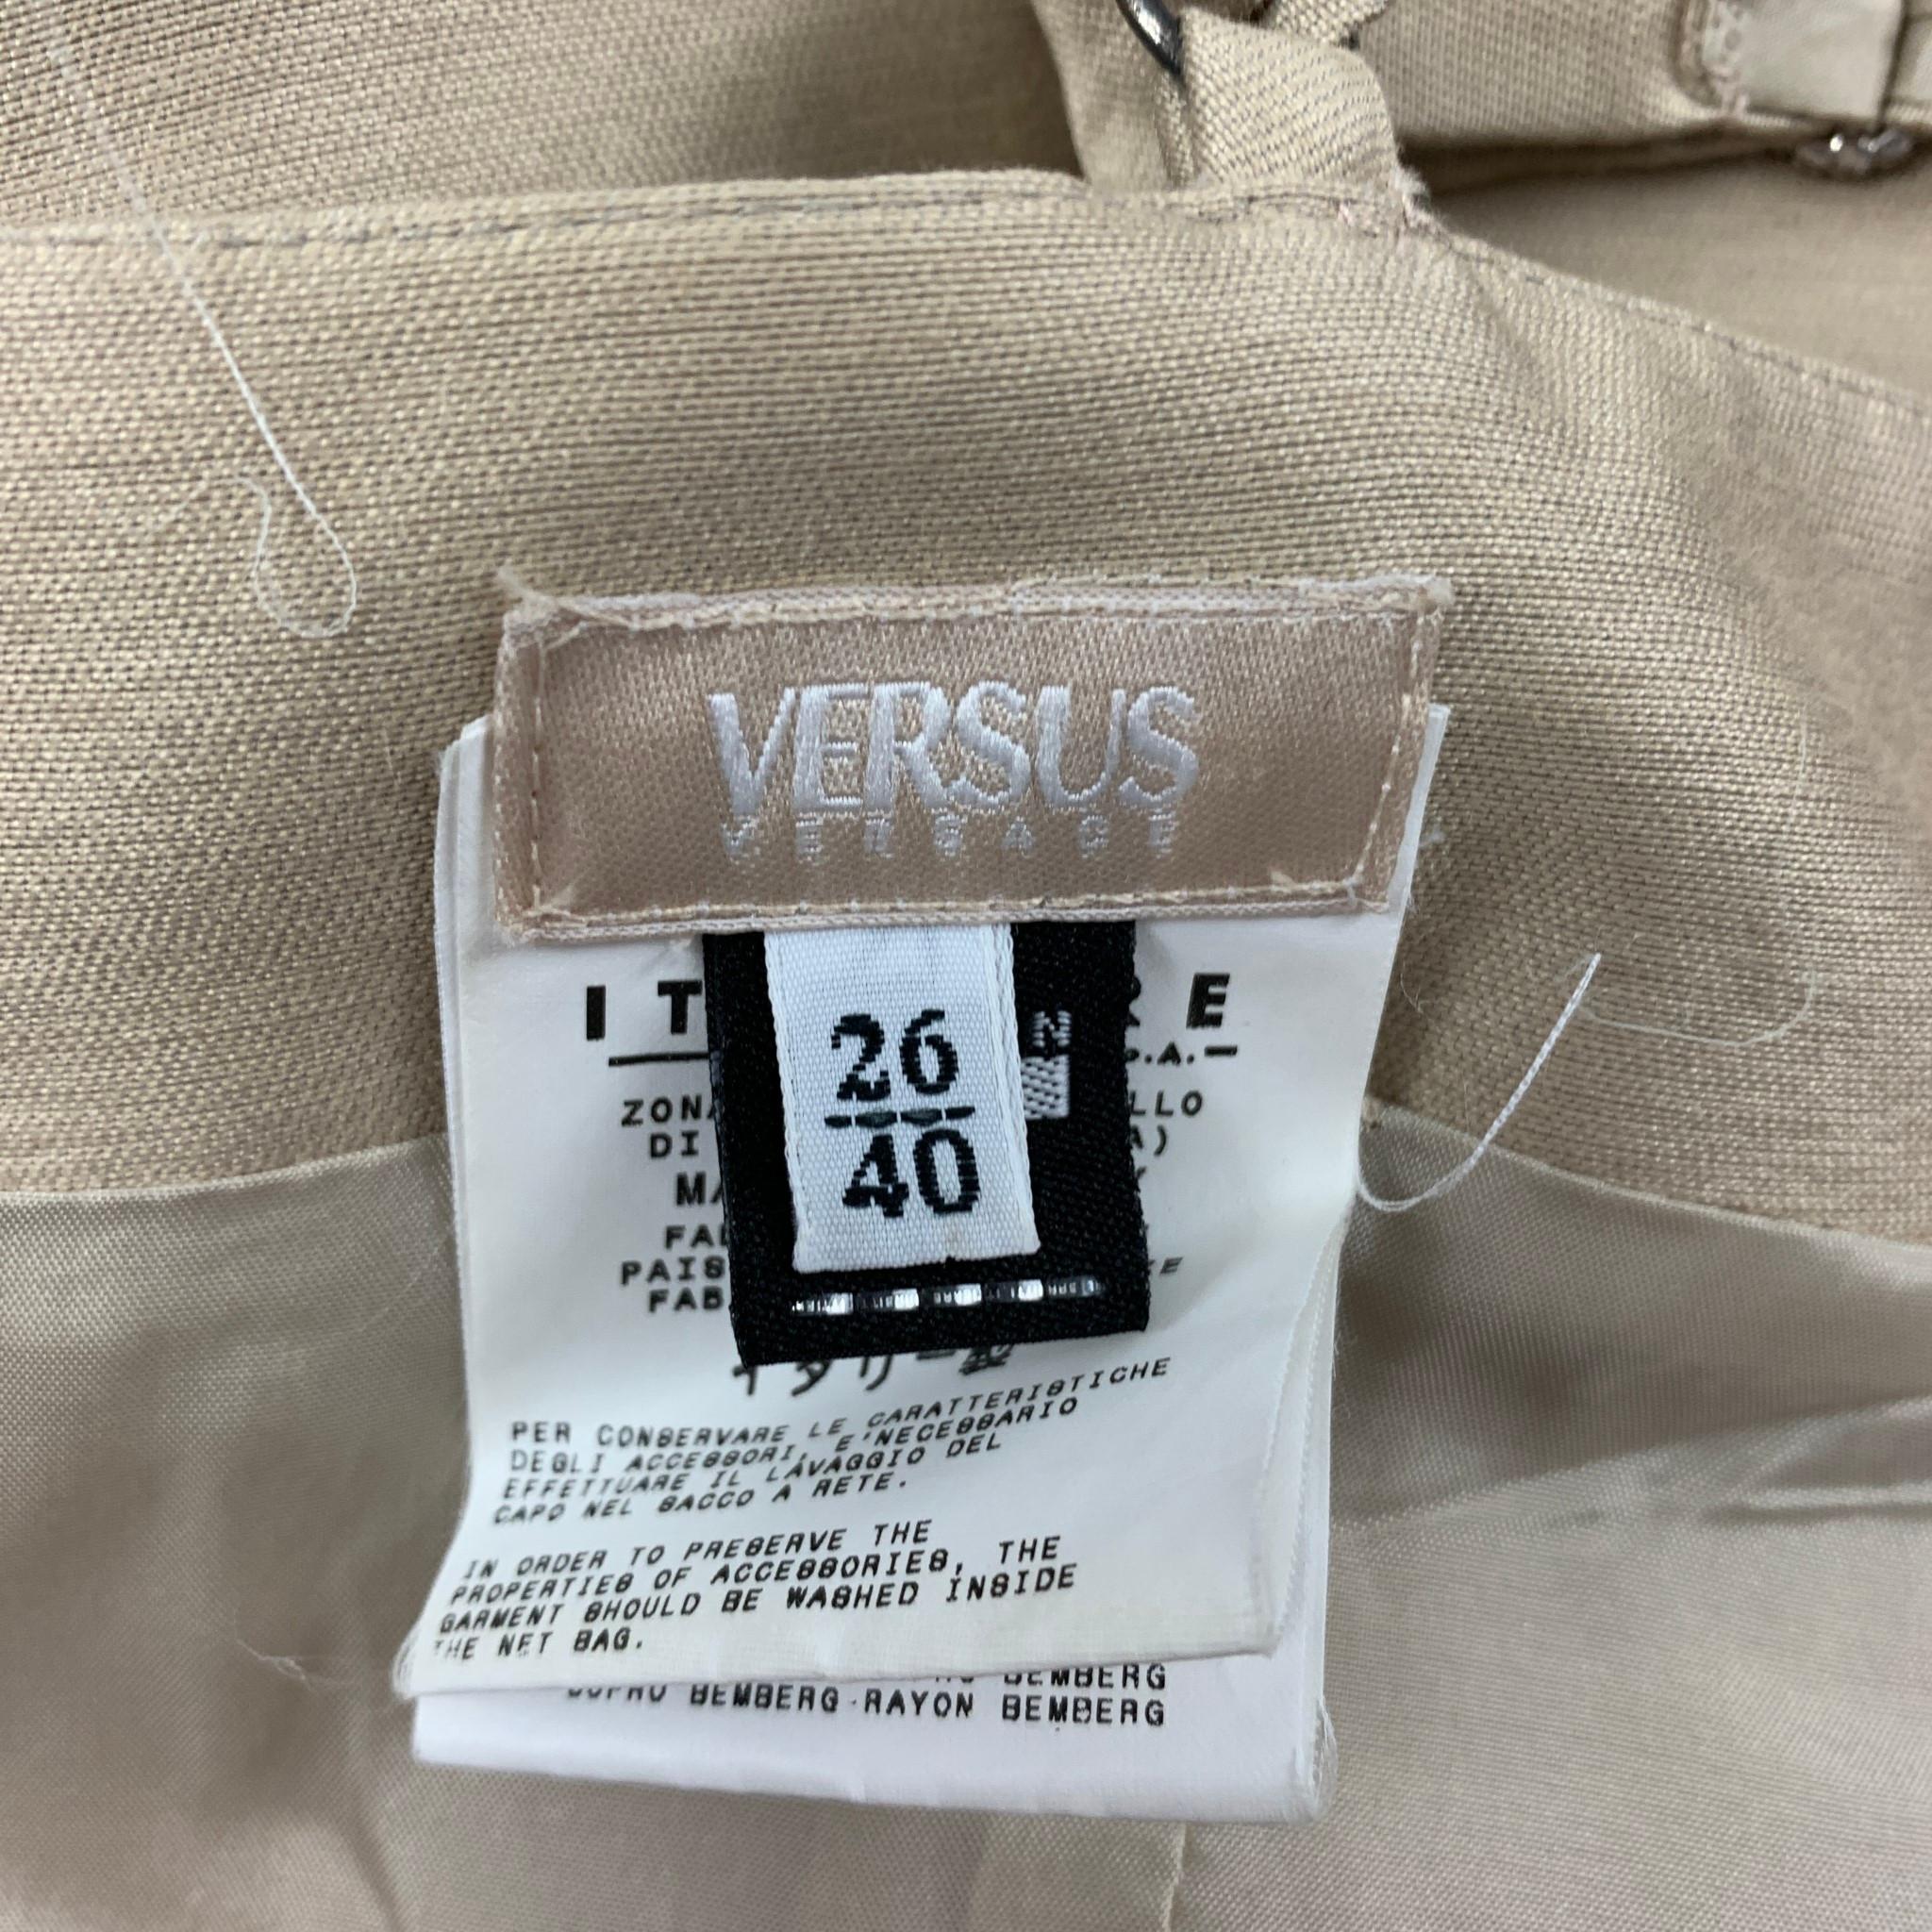 VERSUS by GIANNI VERSACE Size 4 Champagne Cotton Silk Cocktail Dress 1